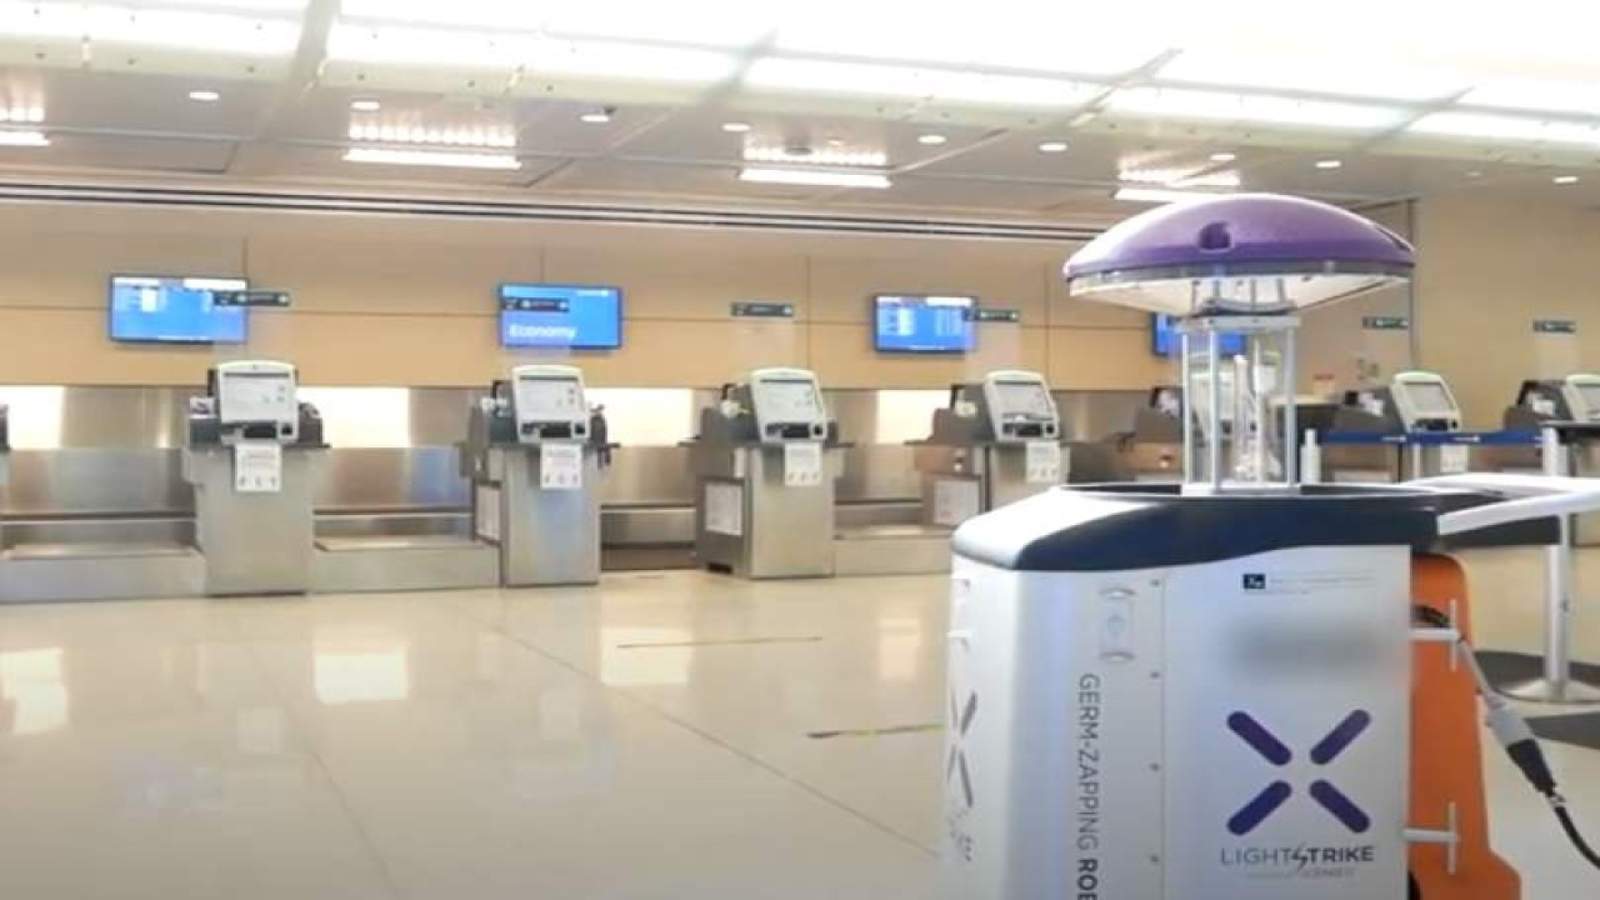 San Antonio International Airport is first in world with LightStrike robot to disinfect from COVID-19